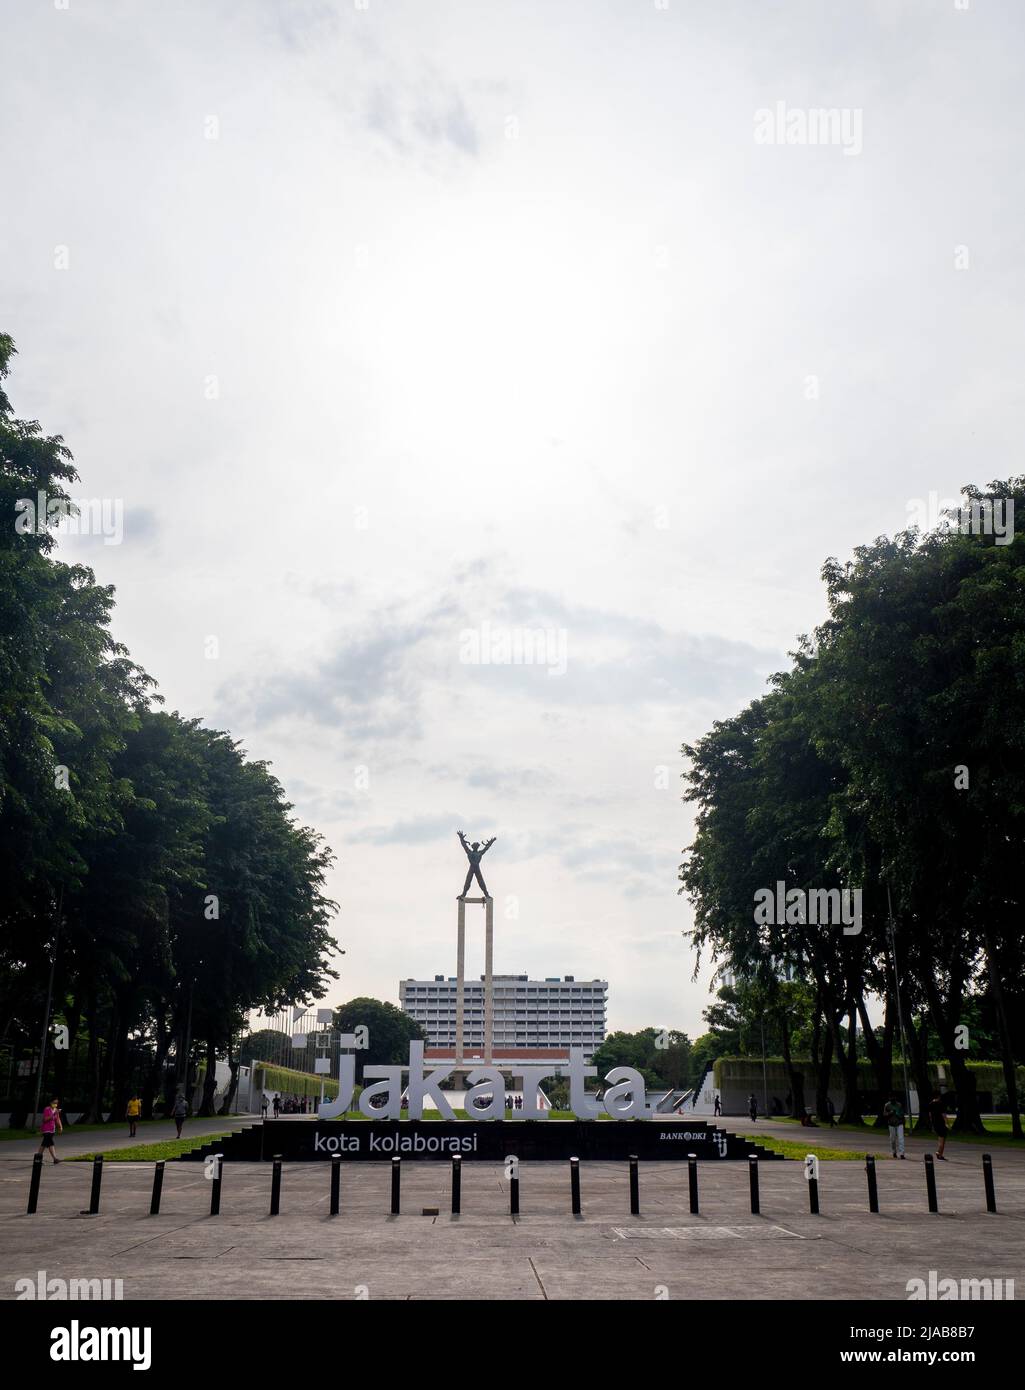 Jakarta, Indonesia - May 10, 2022: The West Irian Liberation Monument is a post-war modernist monument located in Banteng Square, Jakarta, Indonesia. Stock Photo